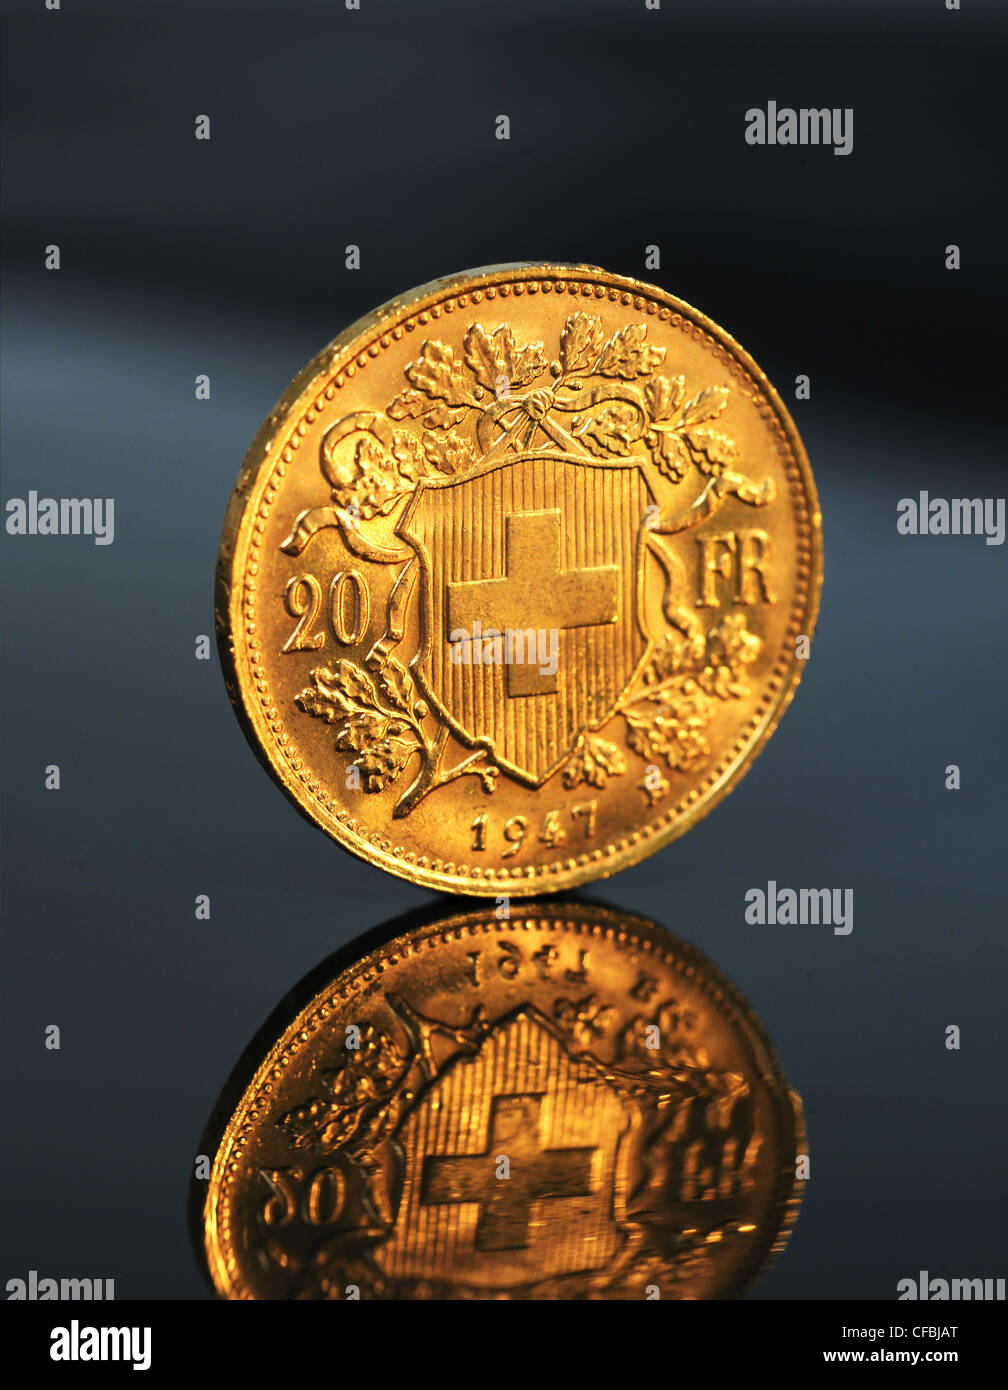 Gold, bank, valuable, value, enclosure, Goldvreneli, brilliant, Switzerland, value, coin, golden coin, save, secure Stock Photo